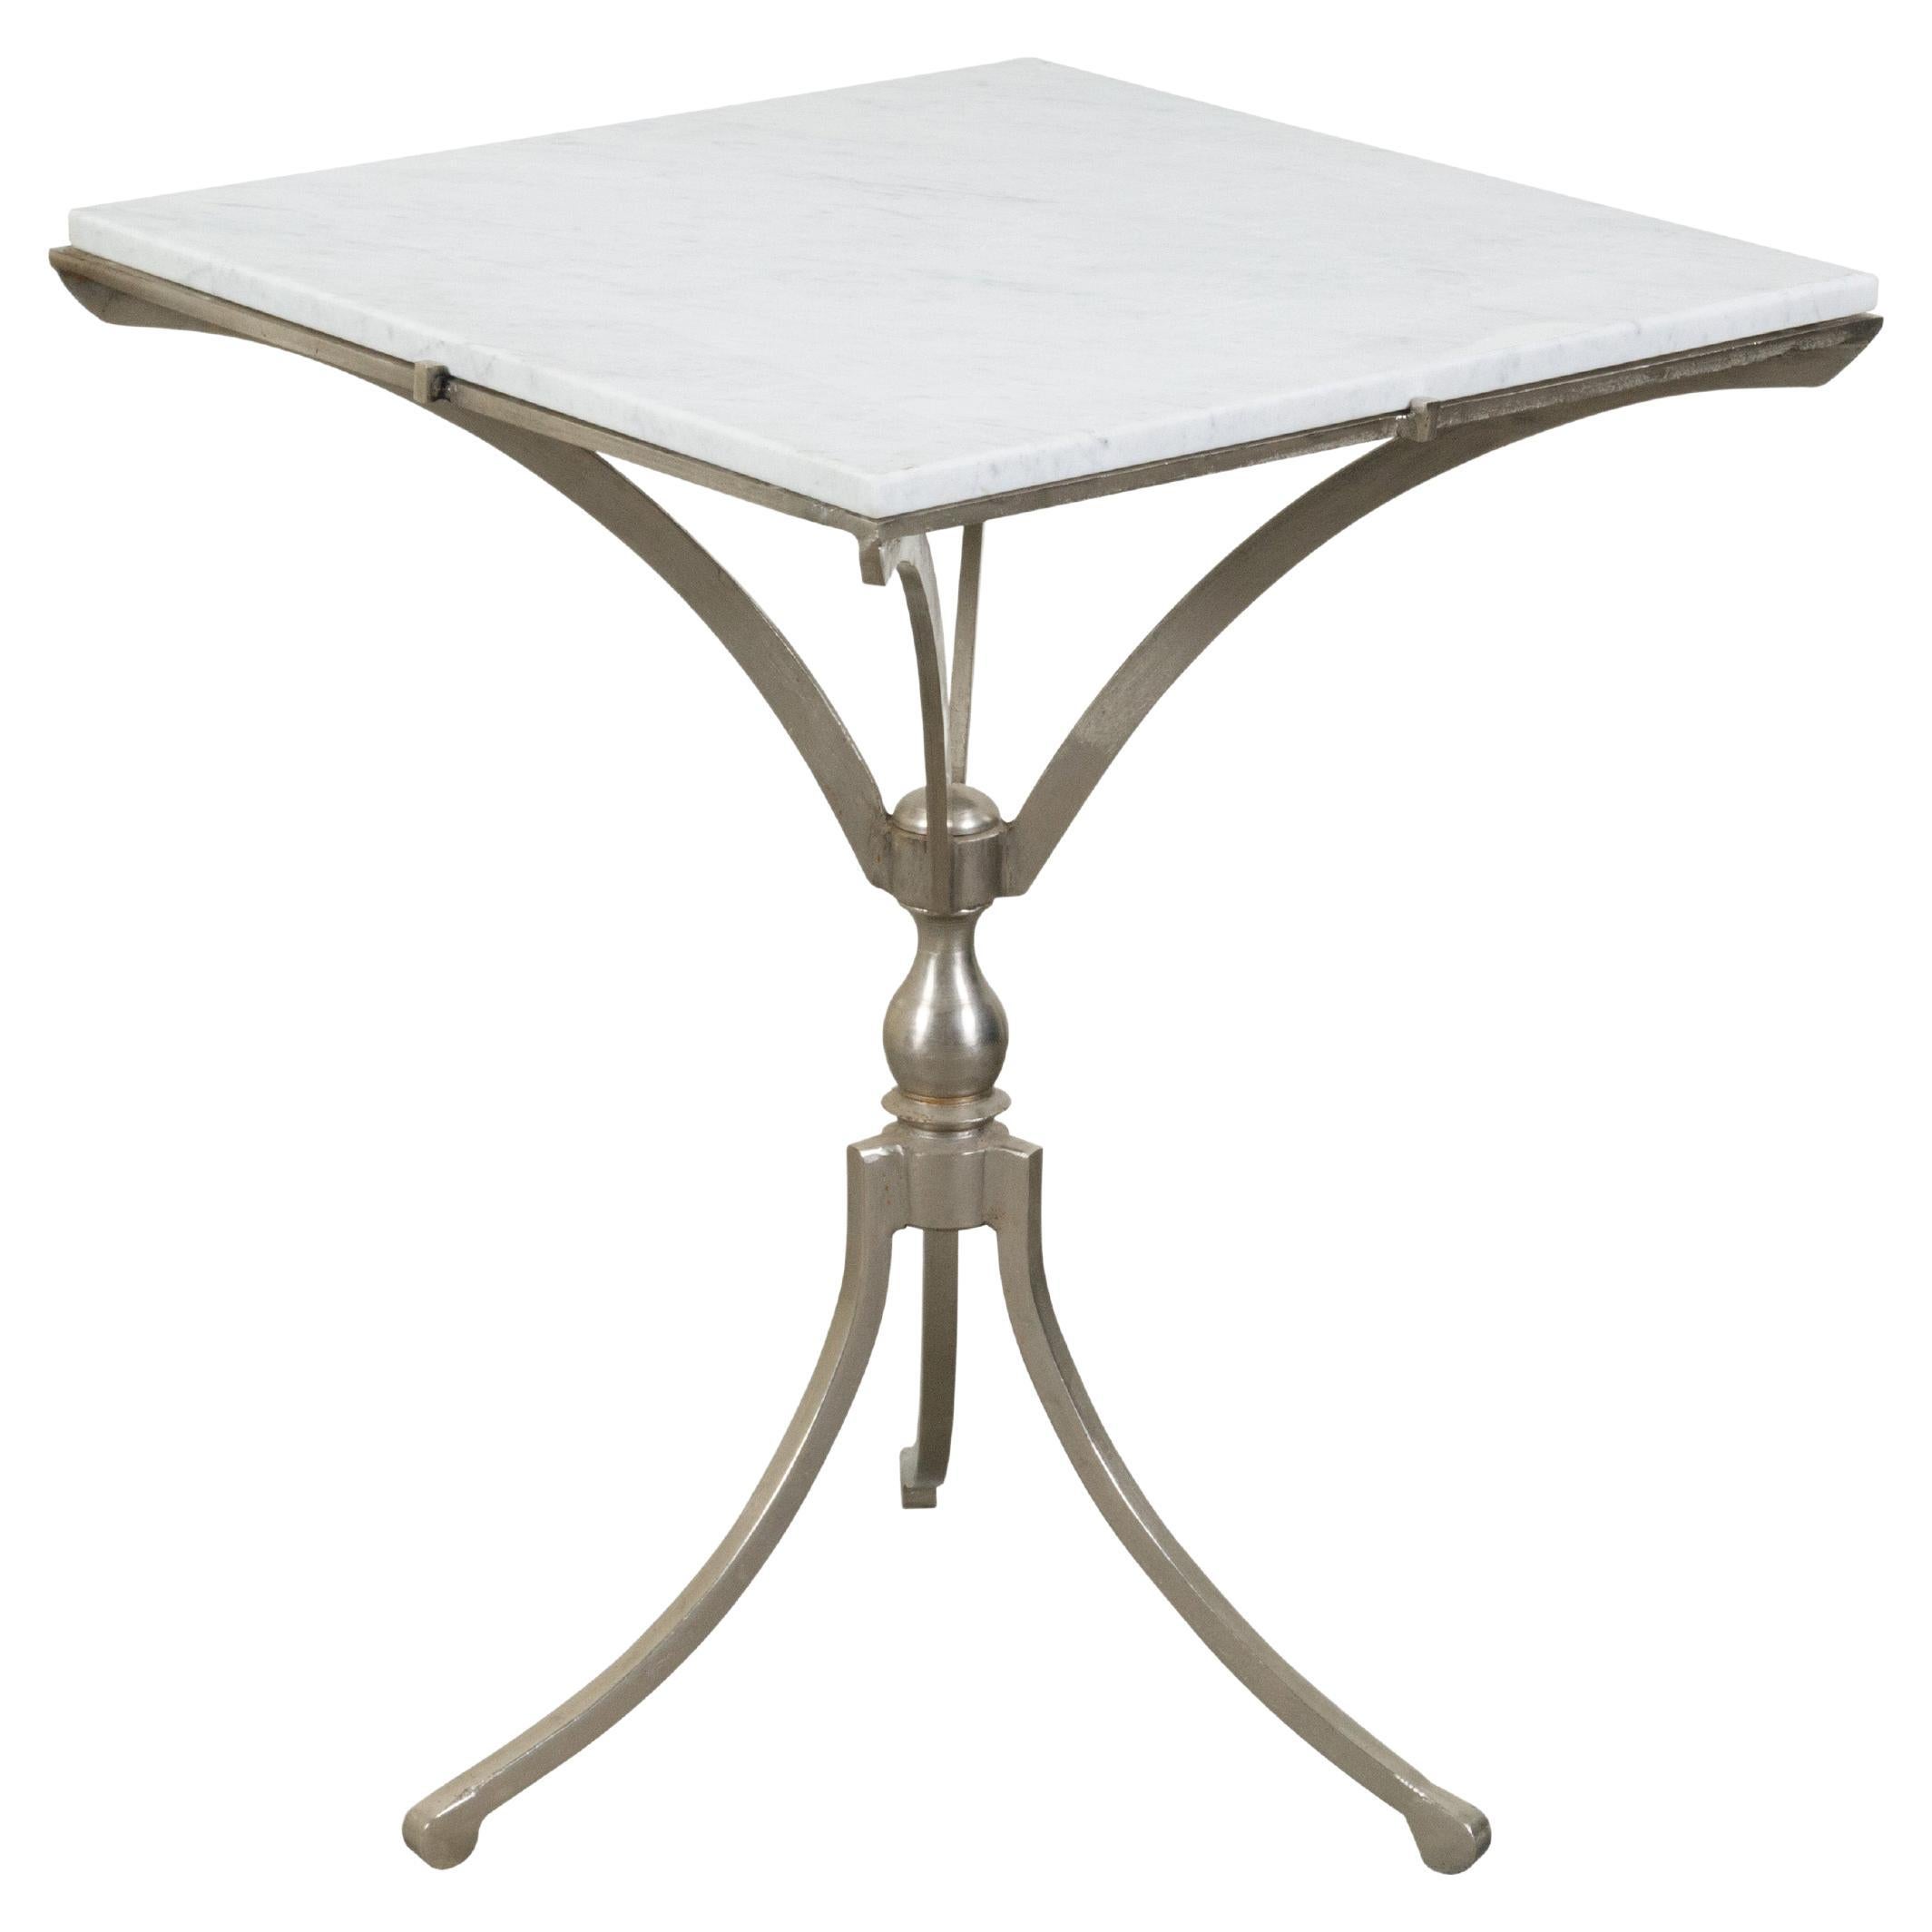 Italian Midcentury Steel Table with White Marble Top and Tripod Base